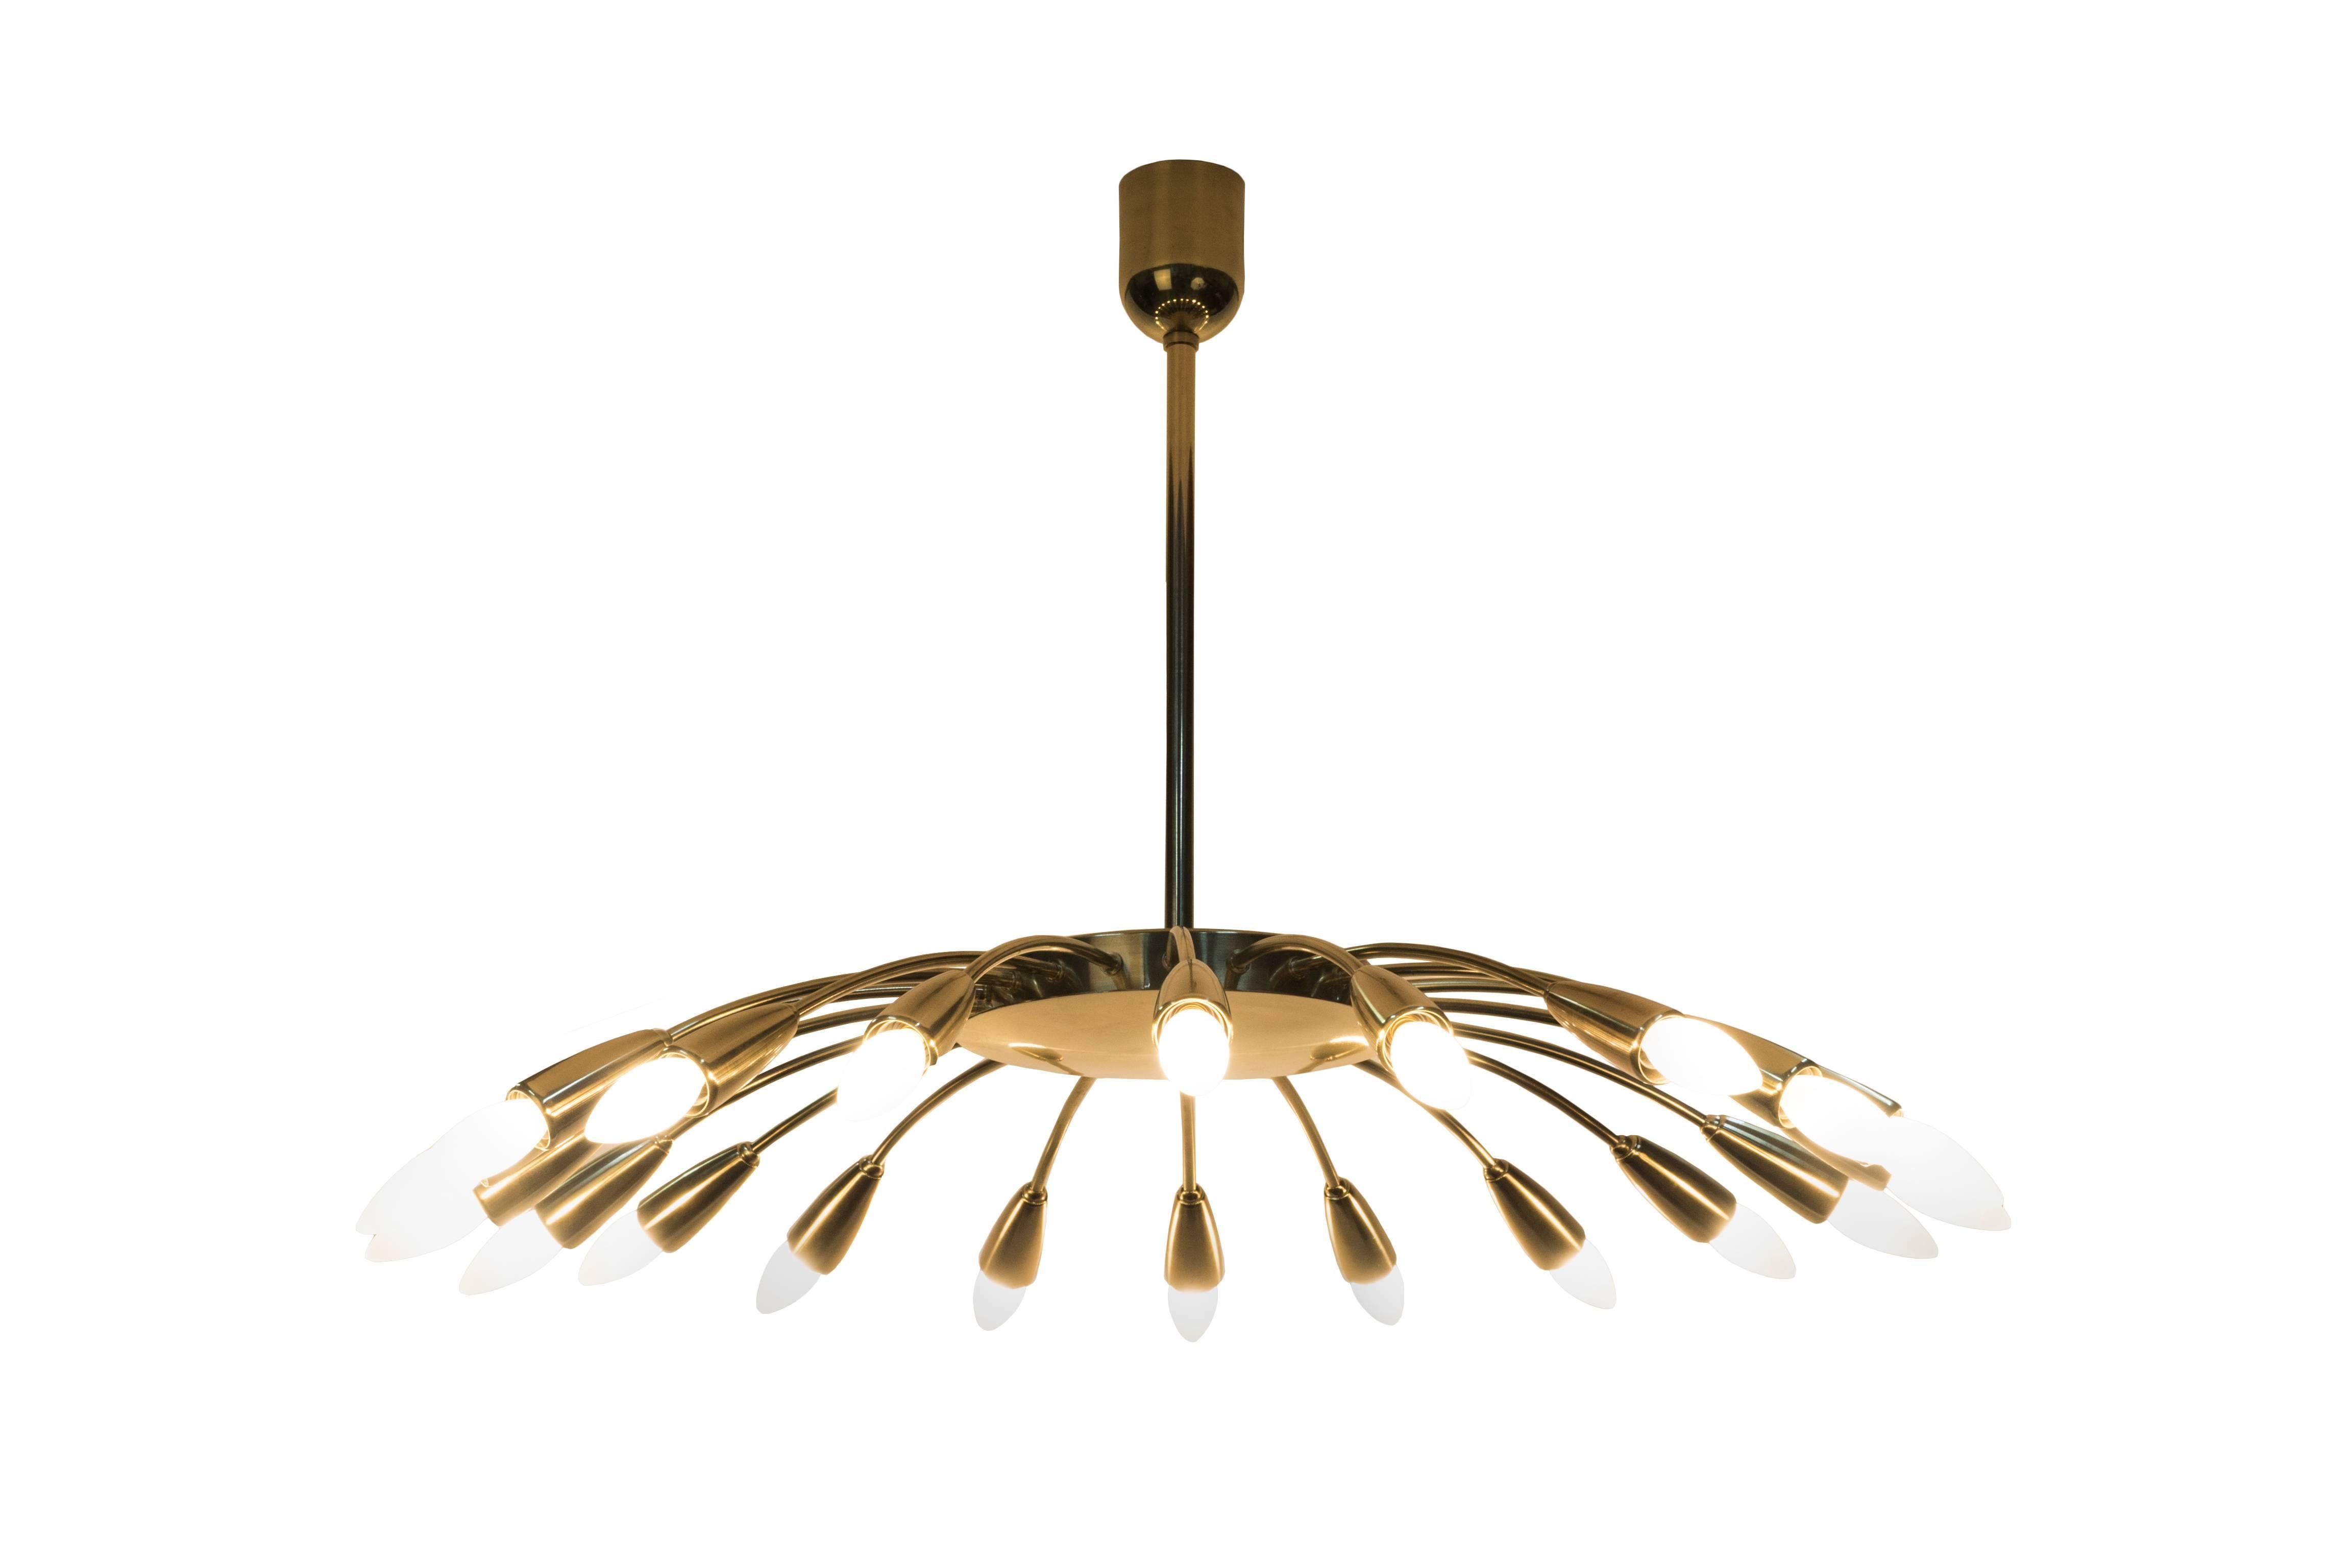 This grand 1950s Mid-Century Modernist  Sputnik chandelier in the style of Stilnovo. It features a 20 arms polished brass spider form design.

Made in Germany, circa 1950

Measures: 36